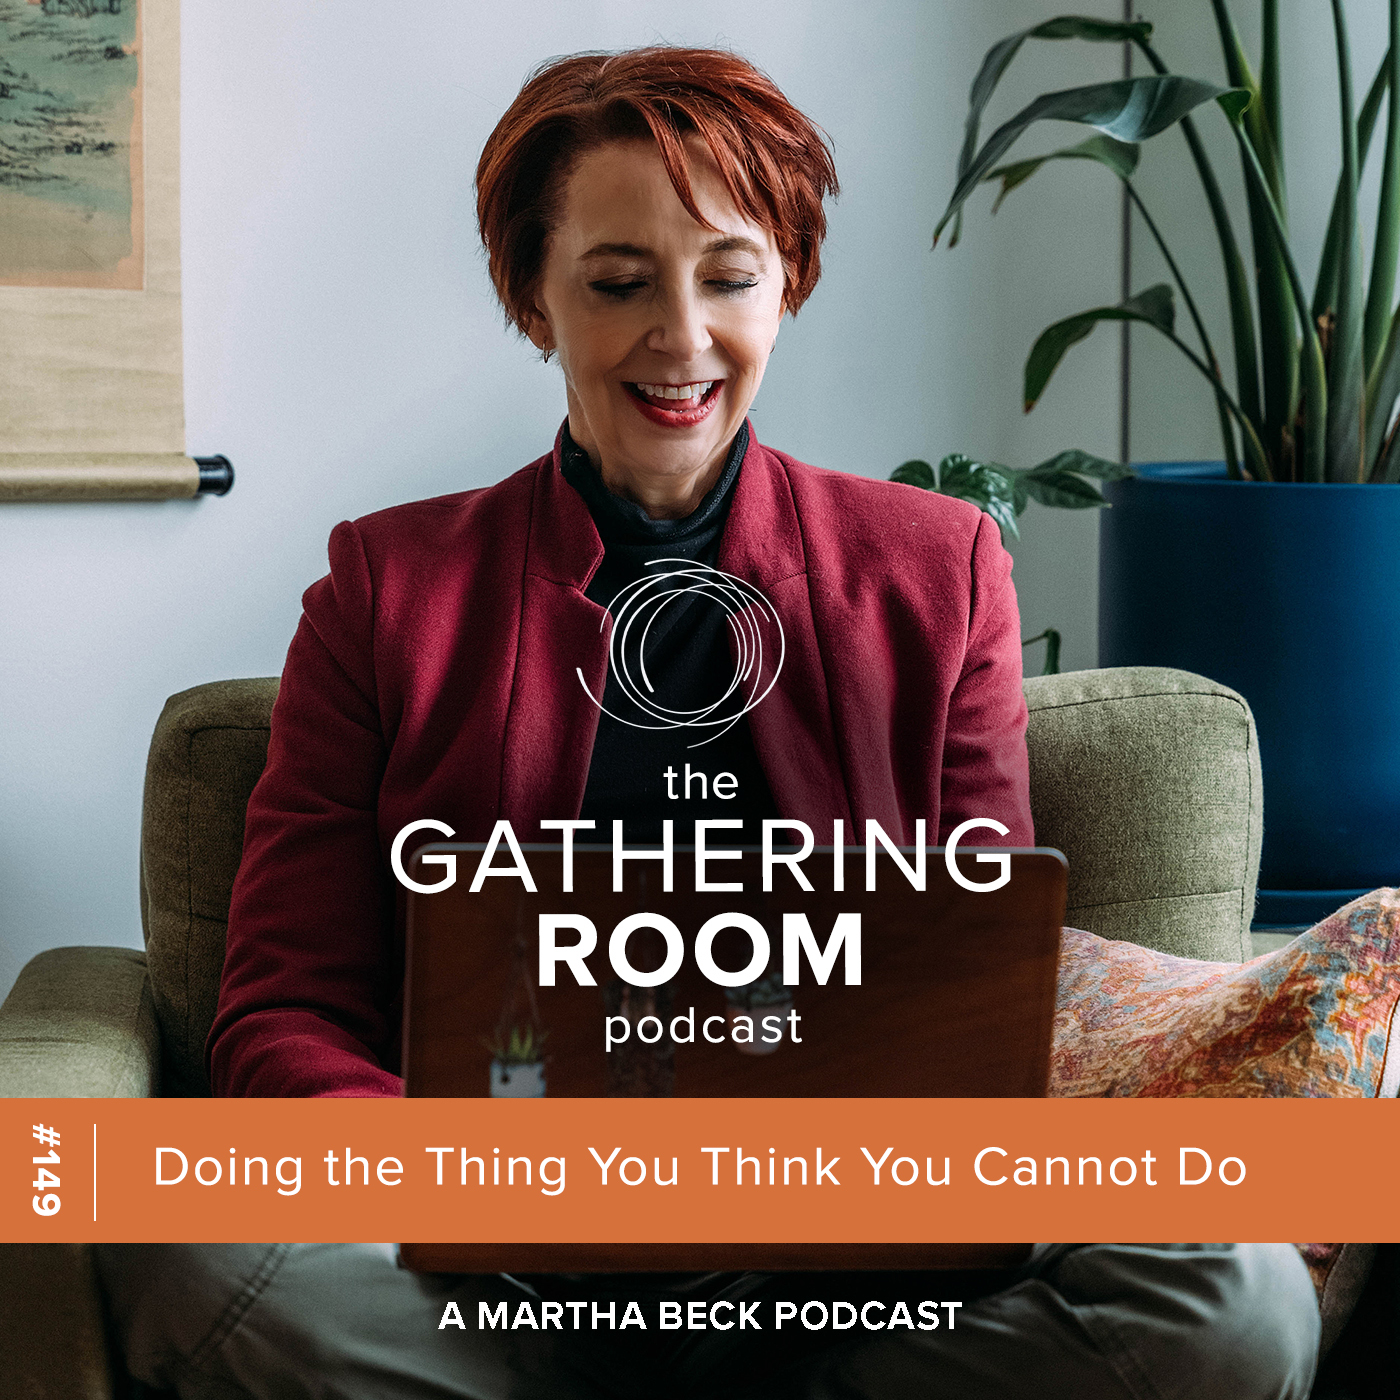 Image for The Gathering Pod A Martha Beck Podcast Episode #149 Doing the Thing You Think You Cannot Do